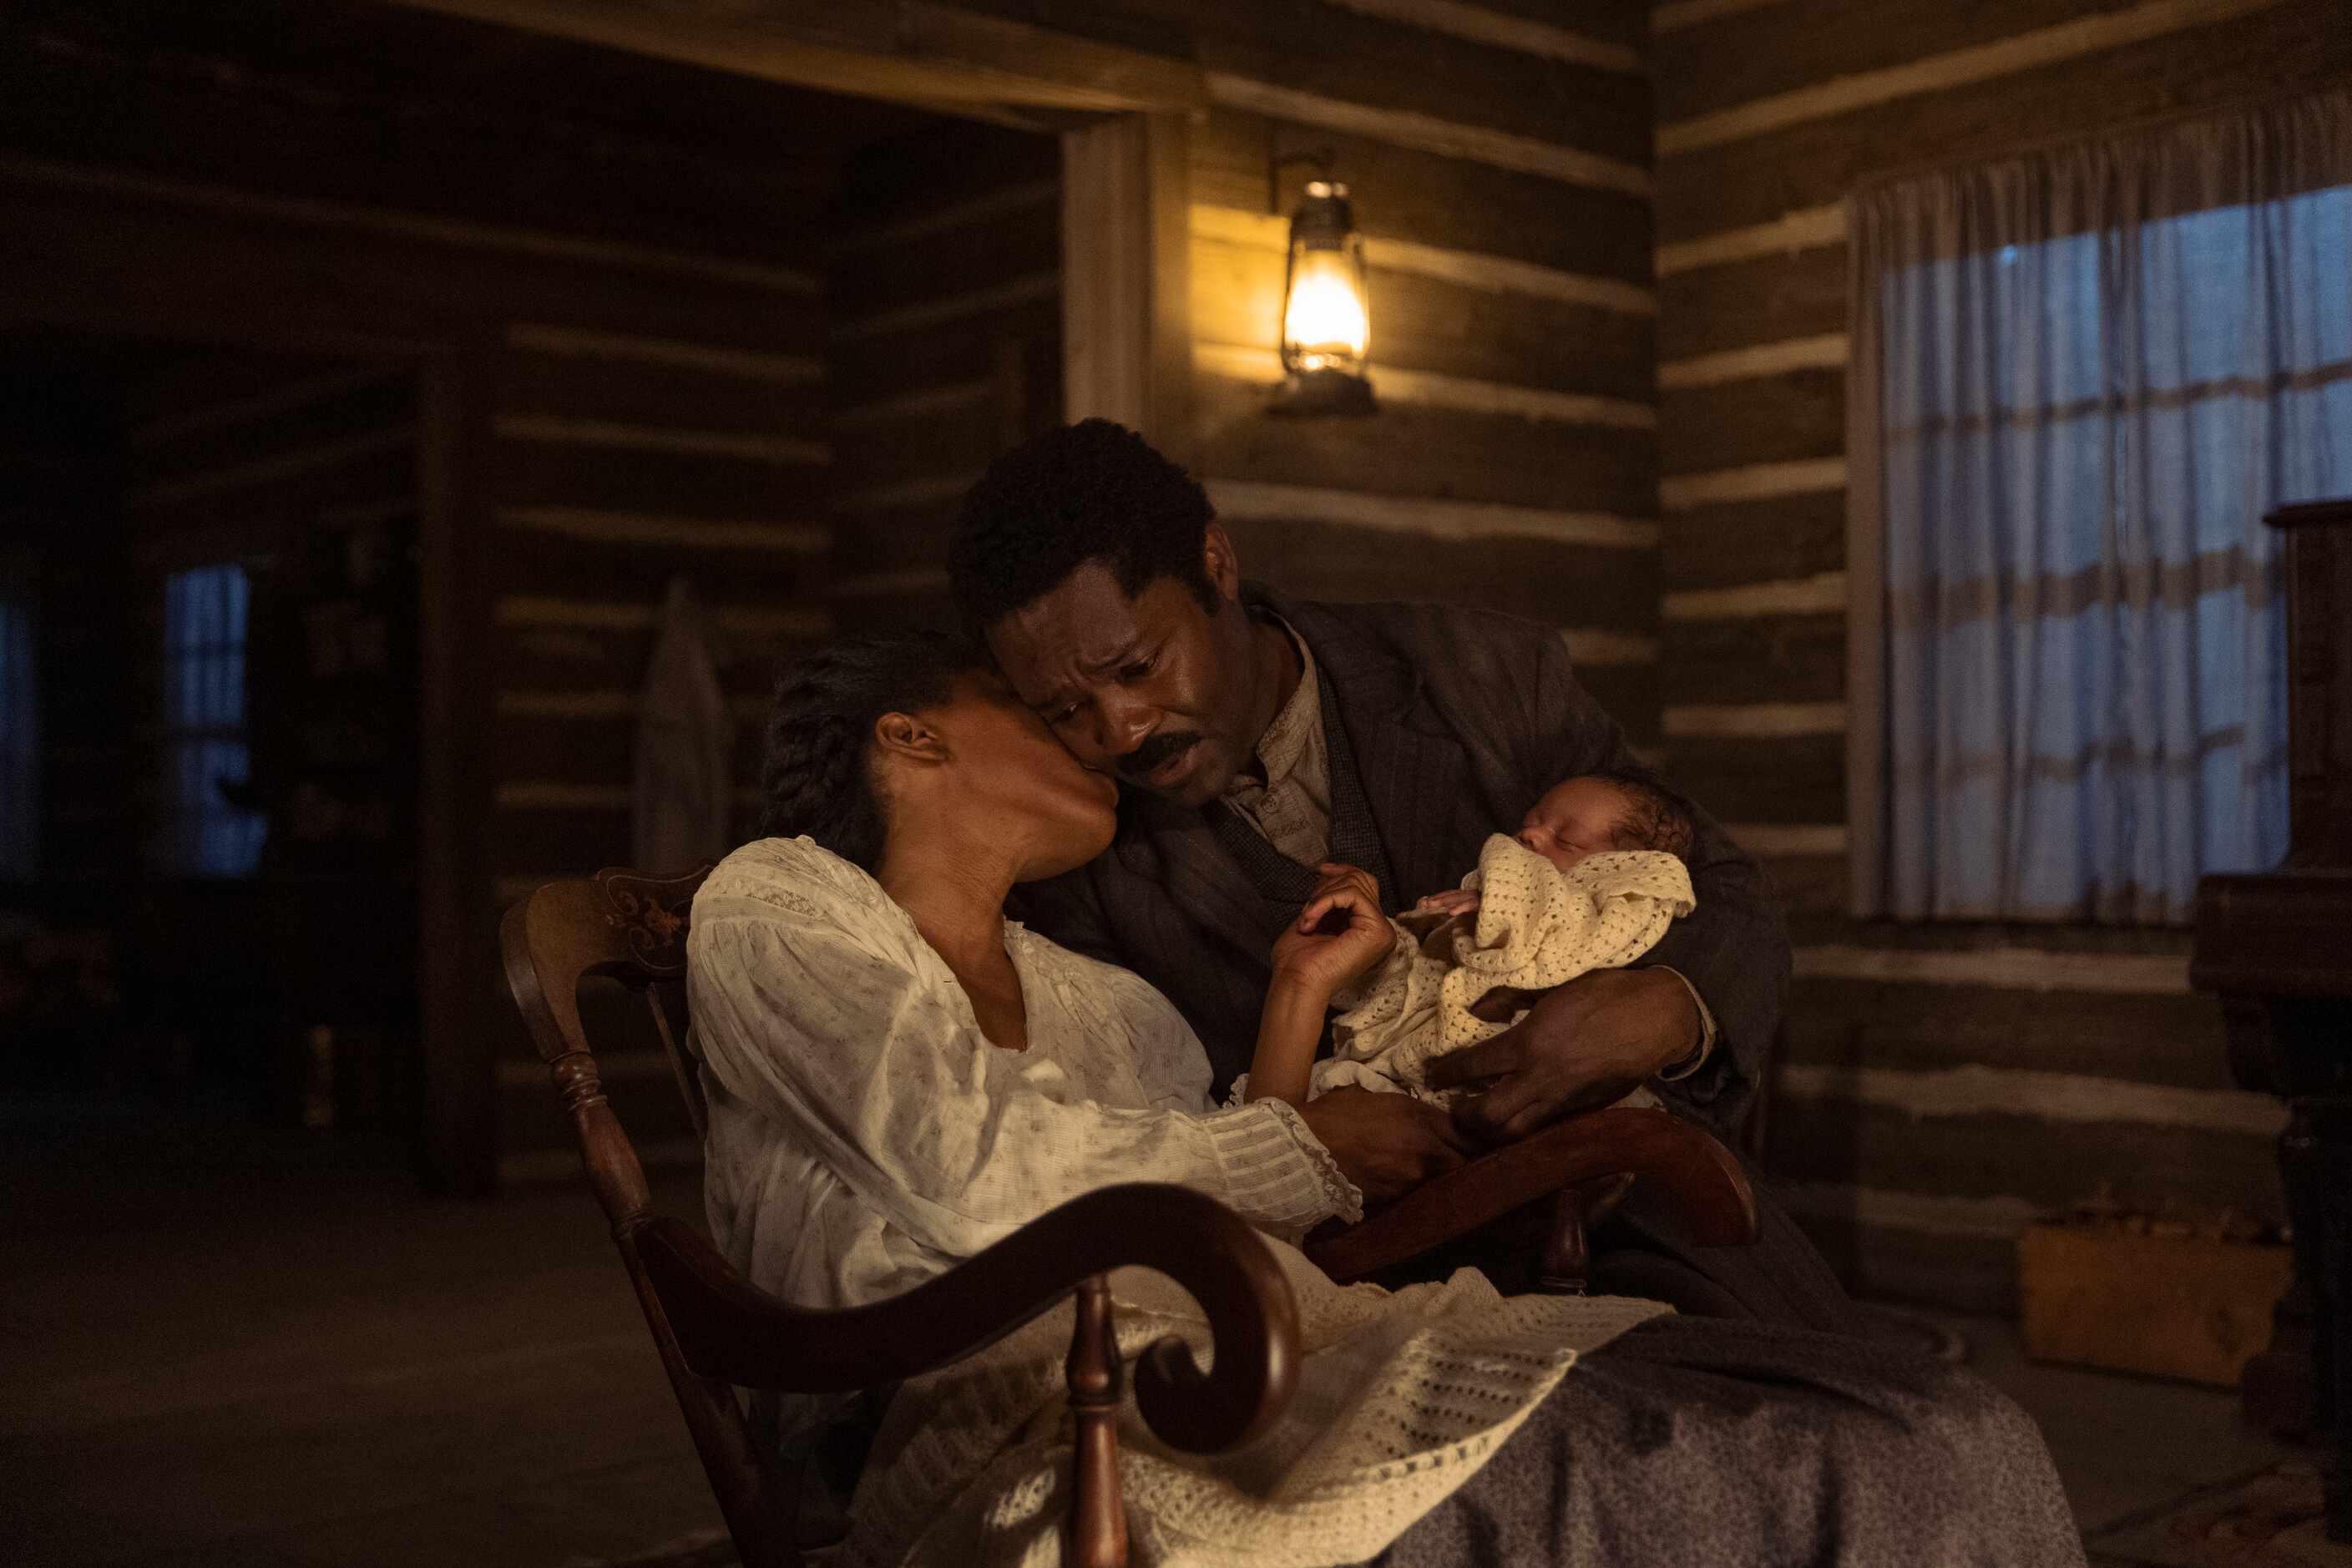 Lauren E. Banks stars as Jennie Reeves and David Oyelewo as Bass Reeves in "Lawmen: Bass...